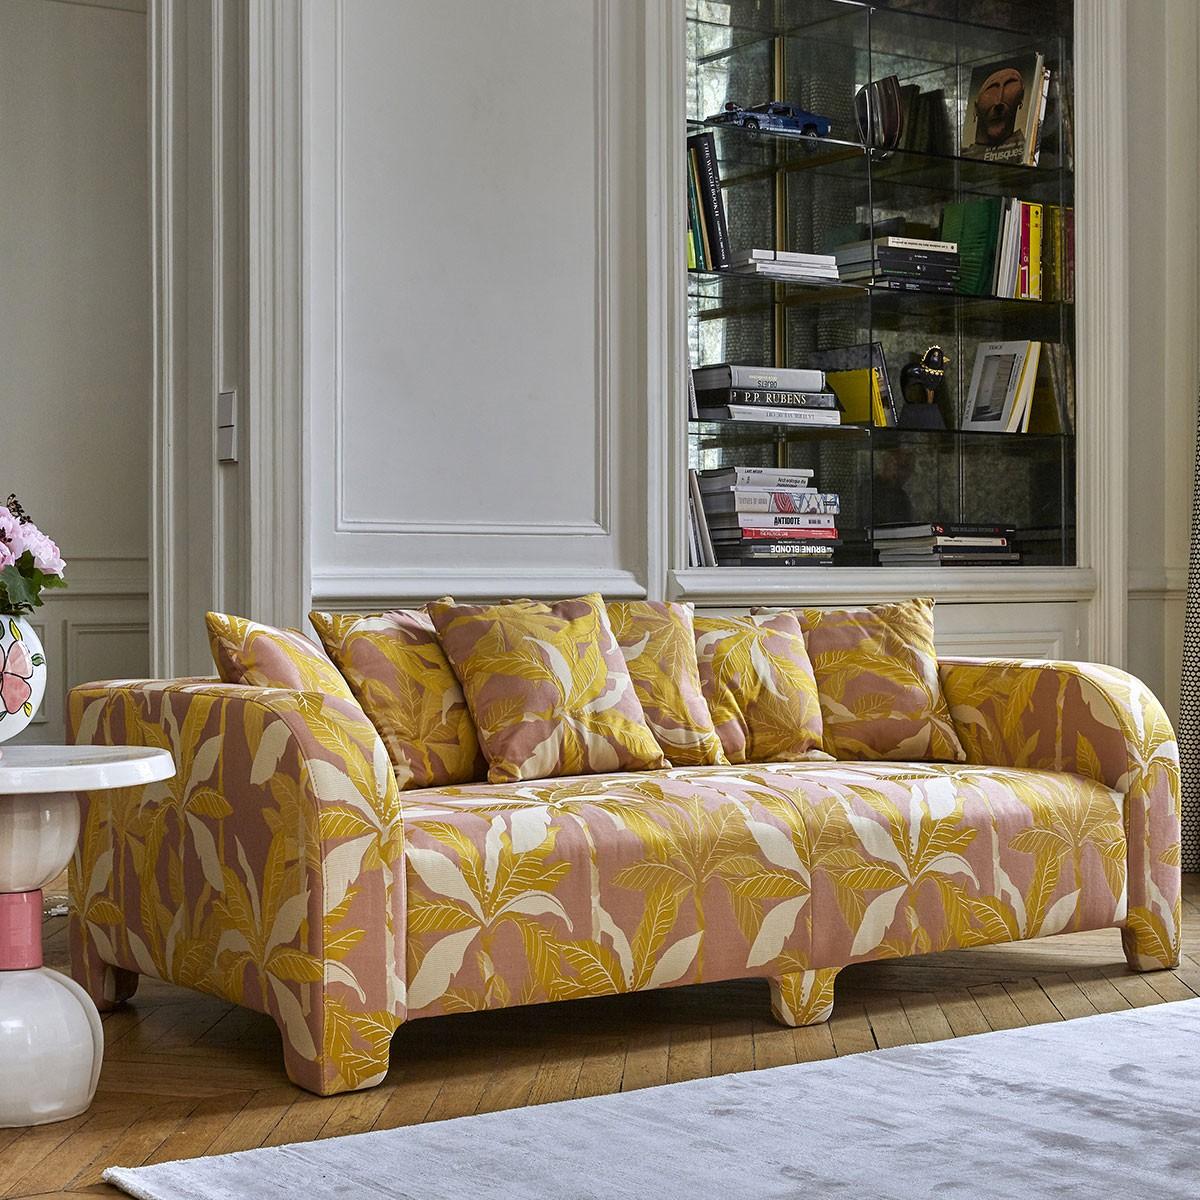 Popus Editions Graziella 2 seater sofa in amber athena loop yarn upholstery

A foot that hides another. A cushion that hides another. A curve that hides another with contemporary lines and a base like a punctuation mark, this sofa gives pride of